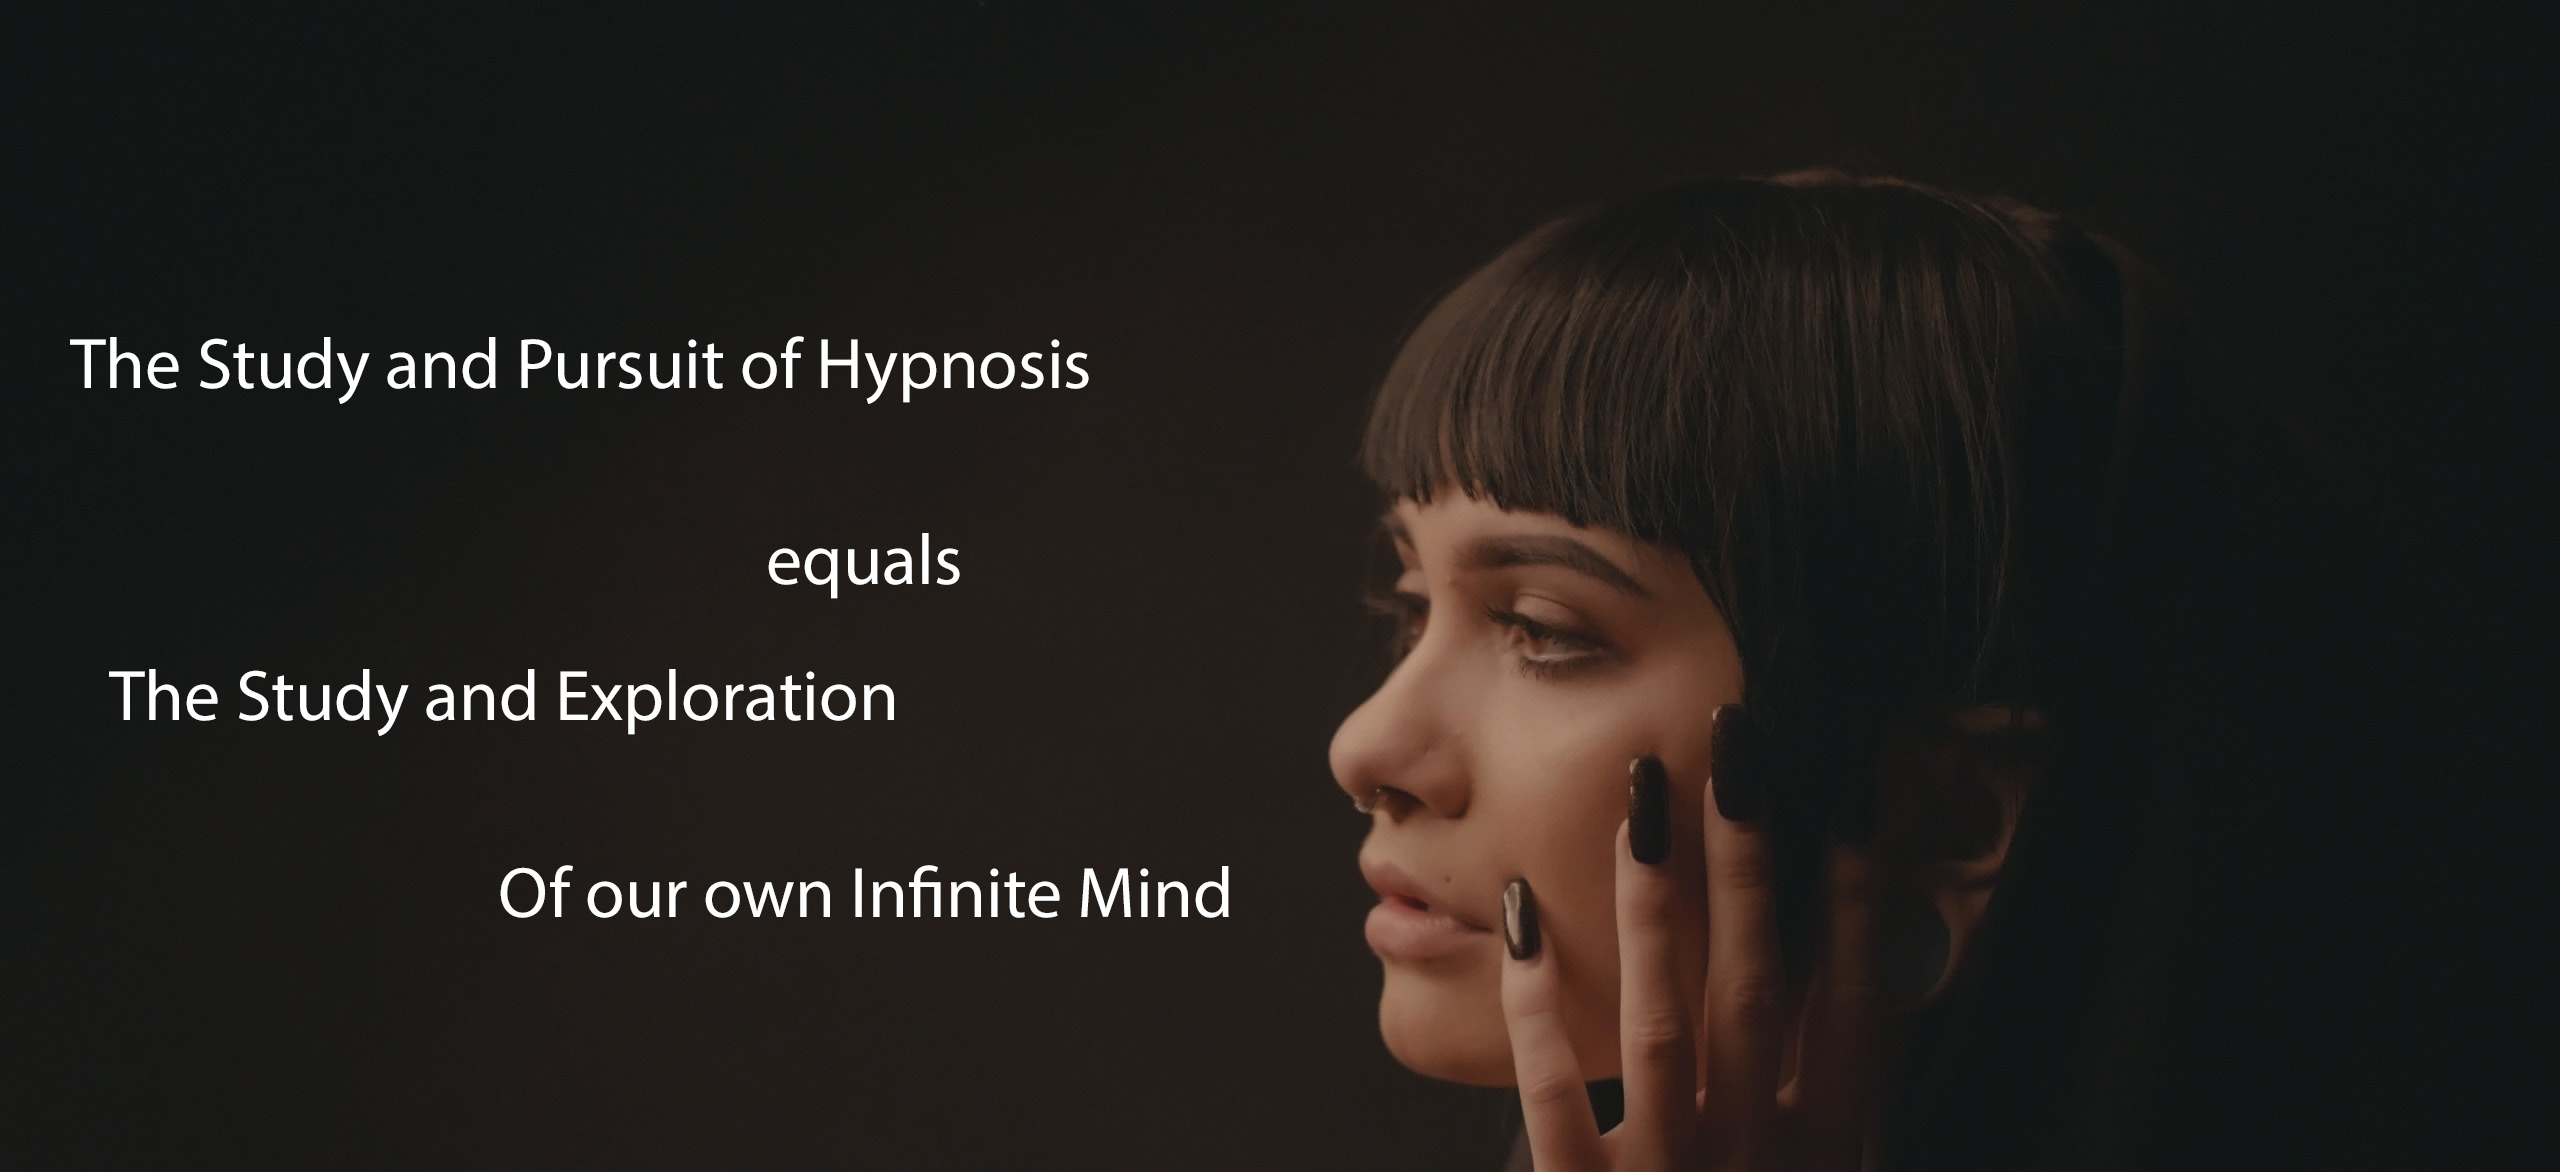 Considering aspects of Hypnosis